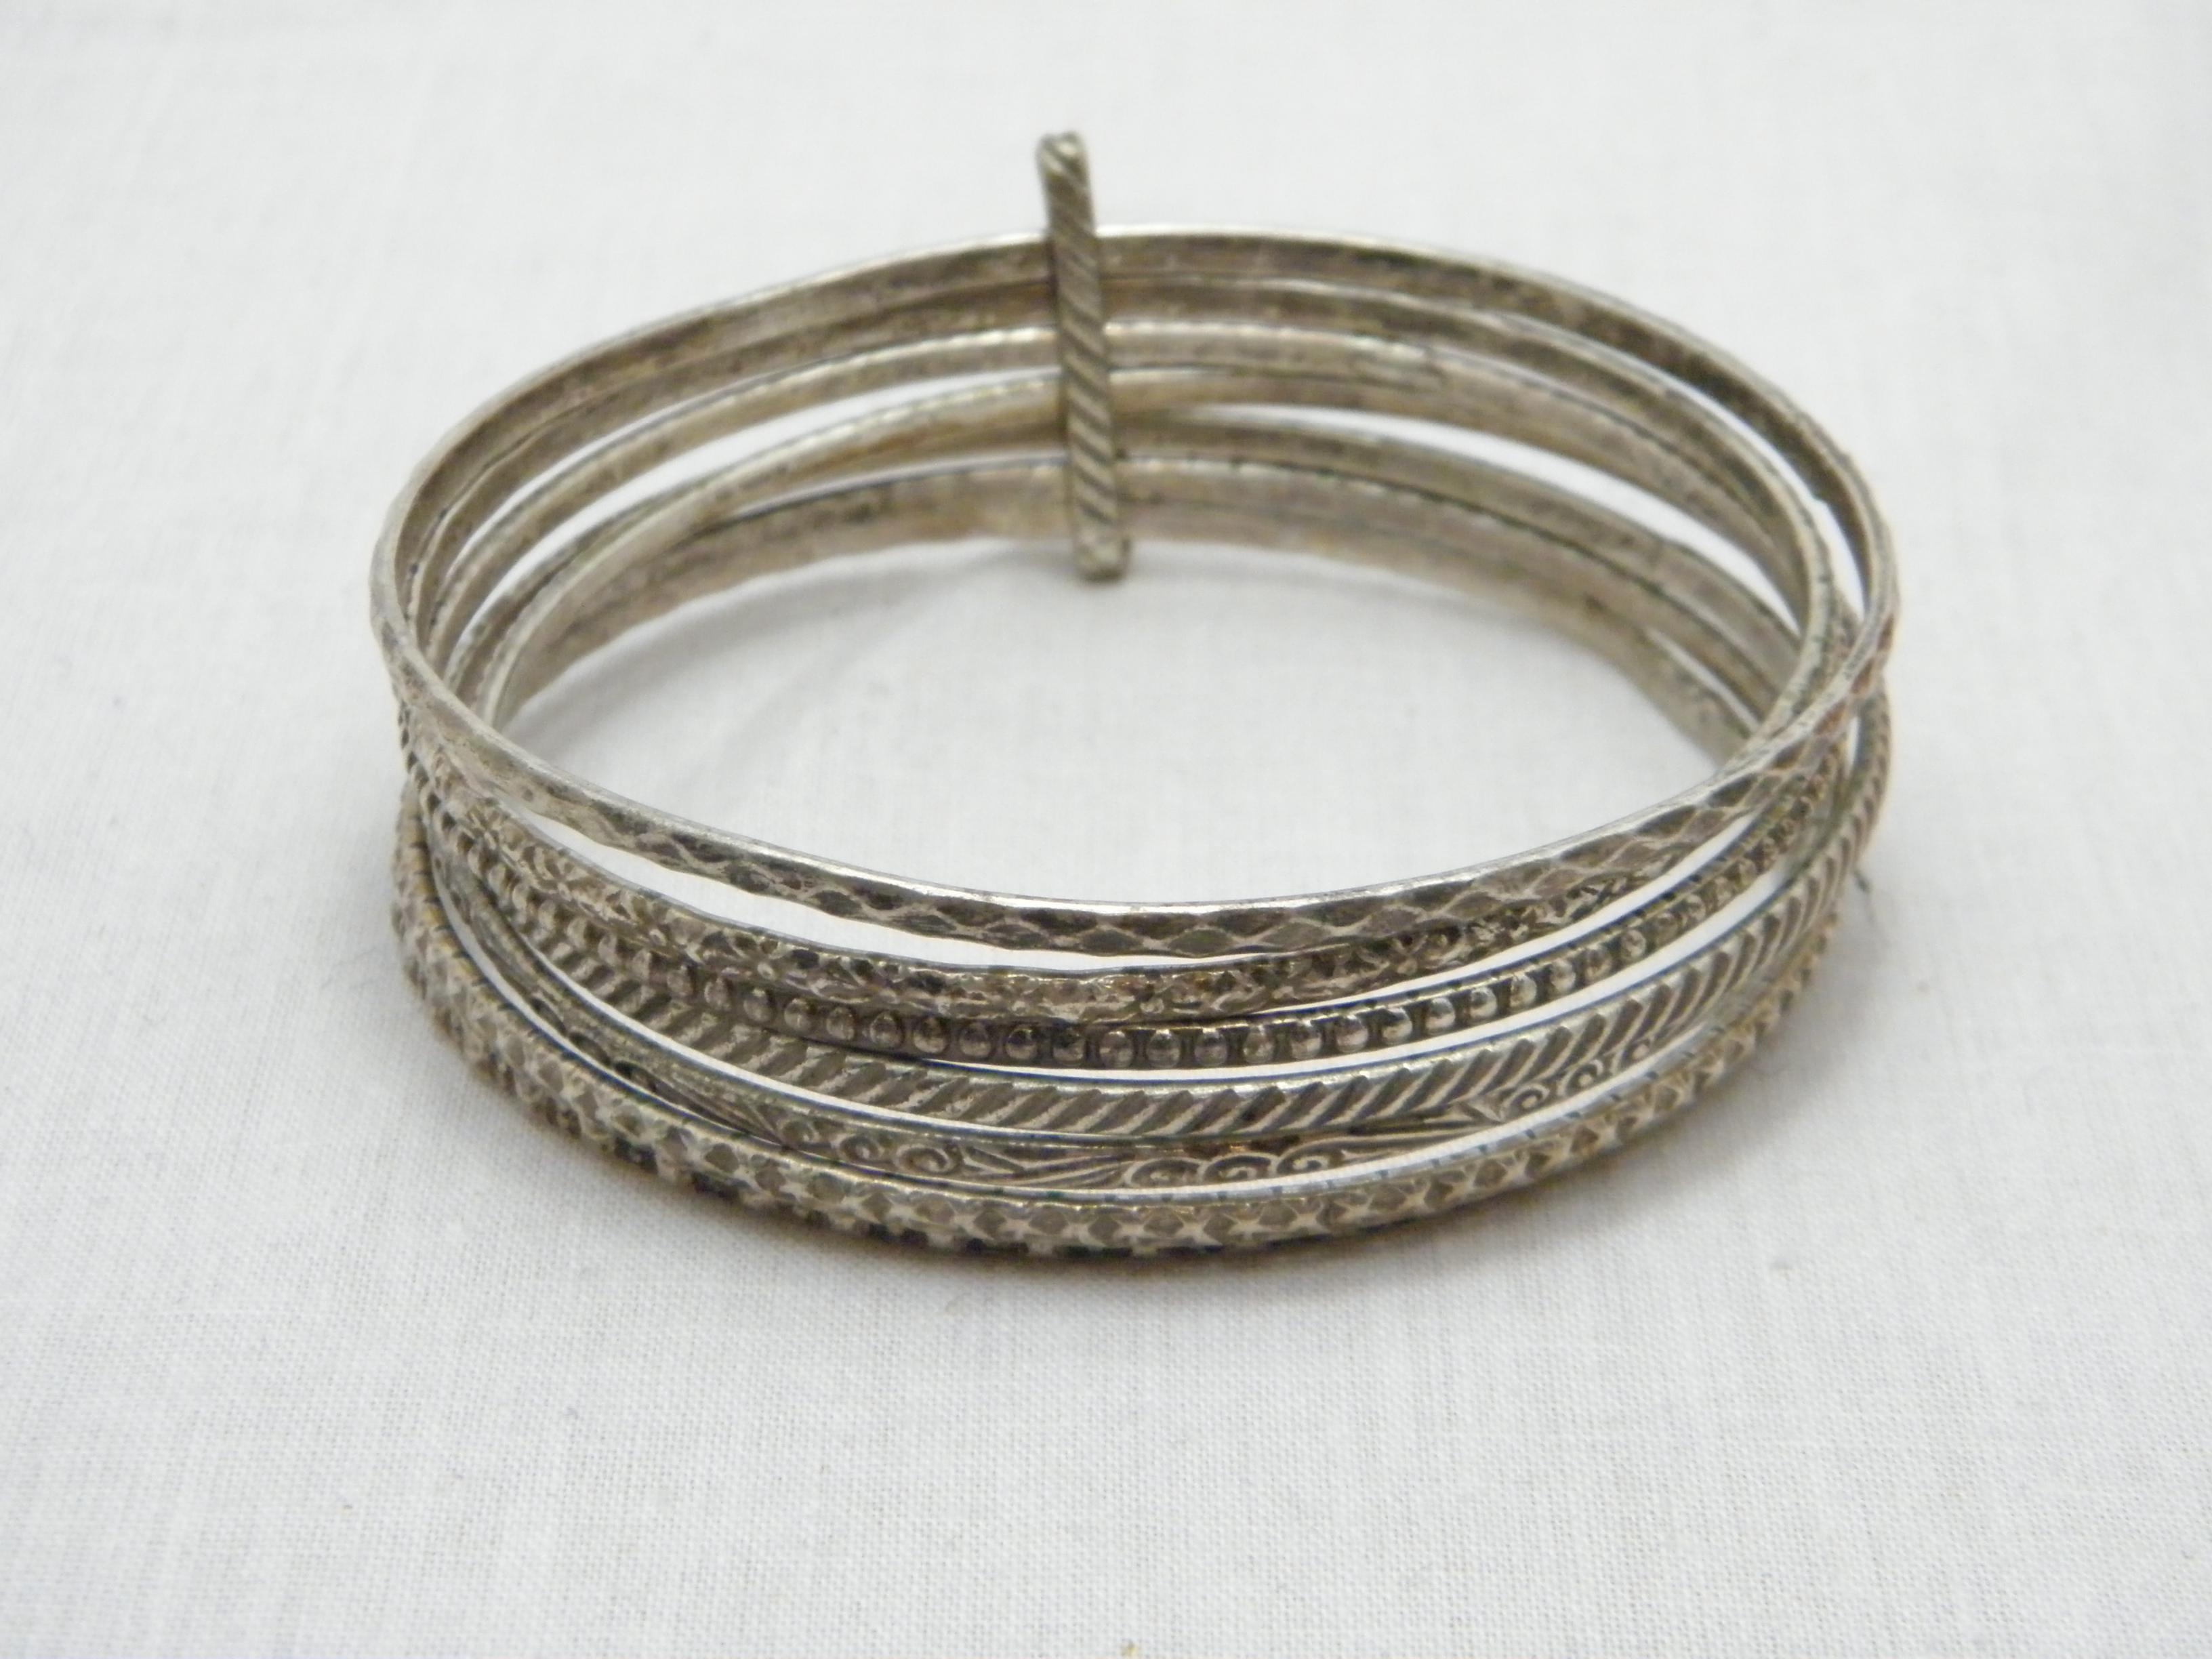 If you have landed on this page then you have an eye for beauty.

On offer is this gorgeous
STERLING SILVER UNUSUAL 7 TIERED MULTI SLAVE BANGLE BRACELET

DETAILS
Material: Thick and Heavy Sterling Silver
Style: 7 Tribal engraved slave bangles held